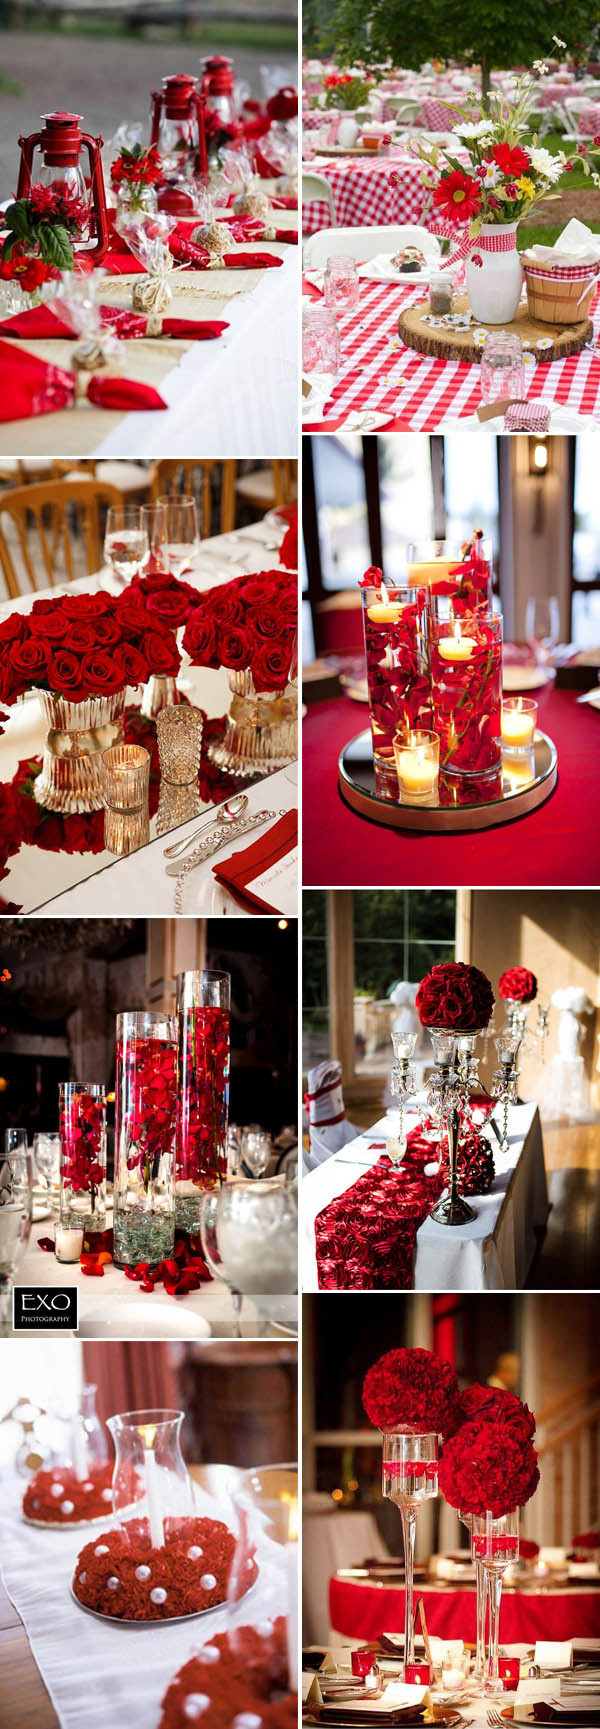 Wedding Decorations Red And White
 40 Inspirational Classic Red And White Wedding Ideas